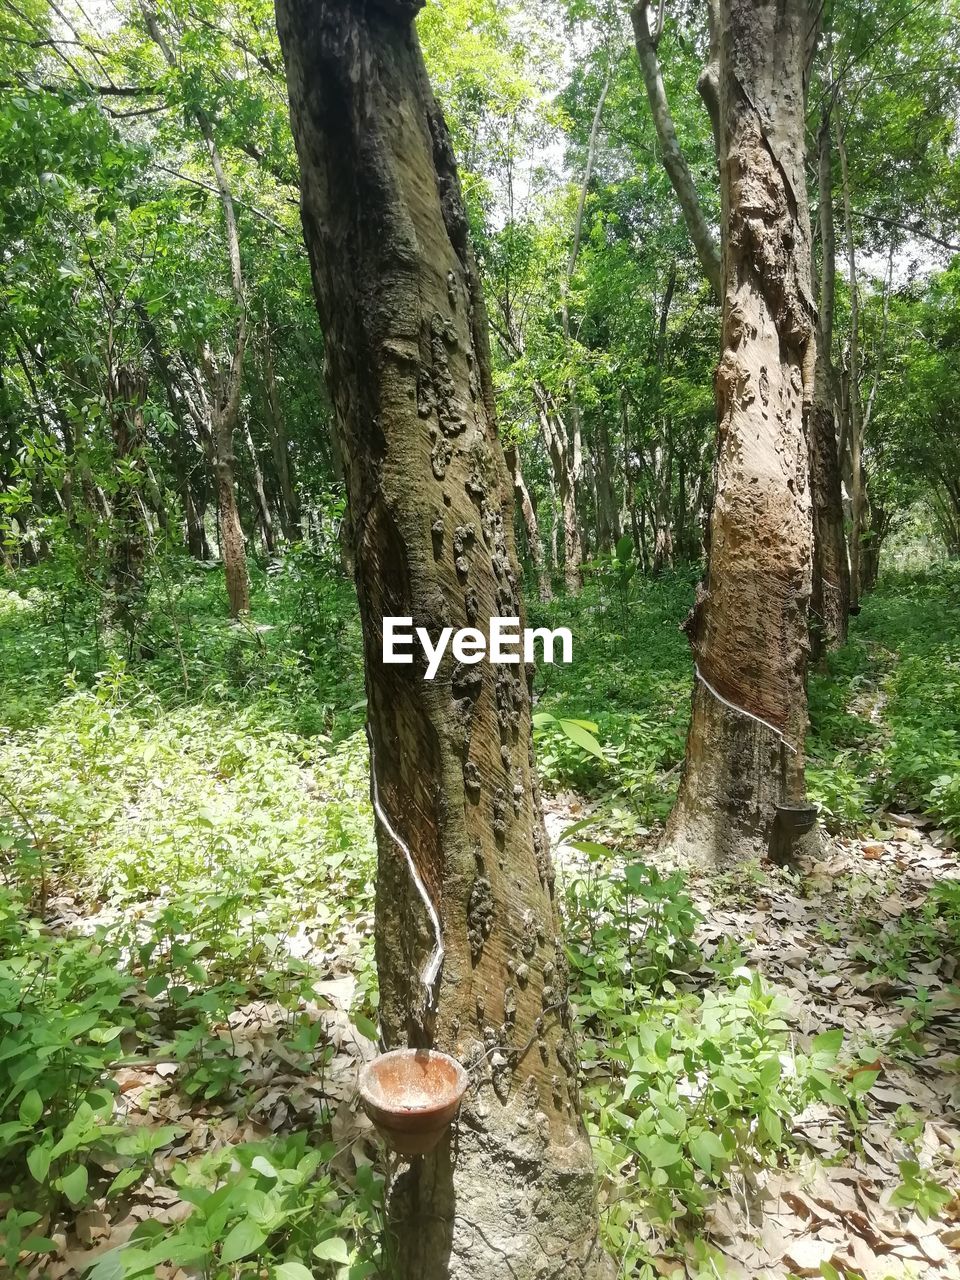 VIEW OF TREE TRUNK ON FIELD